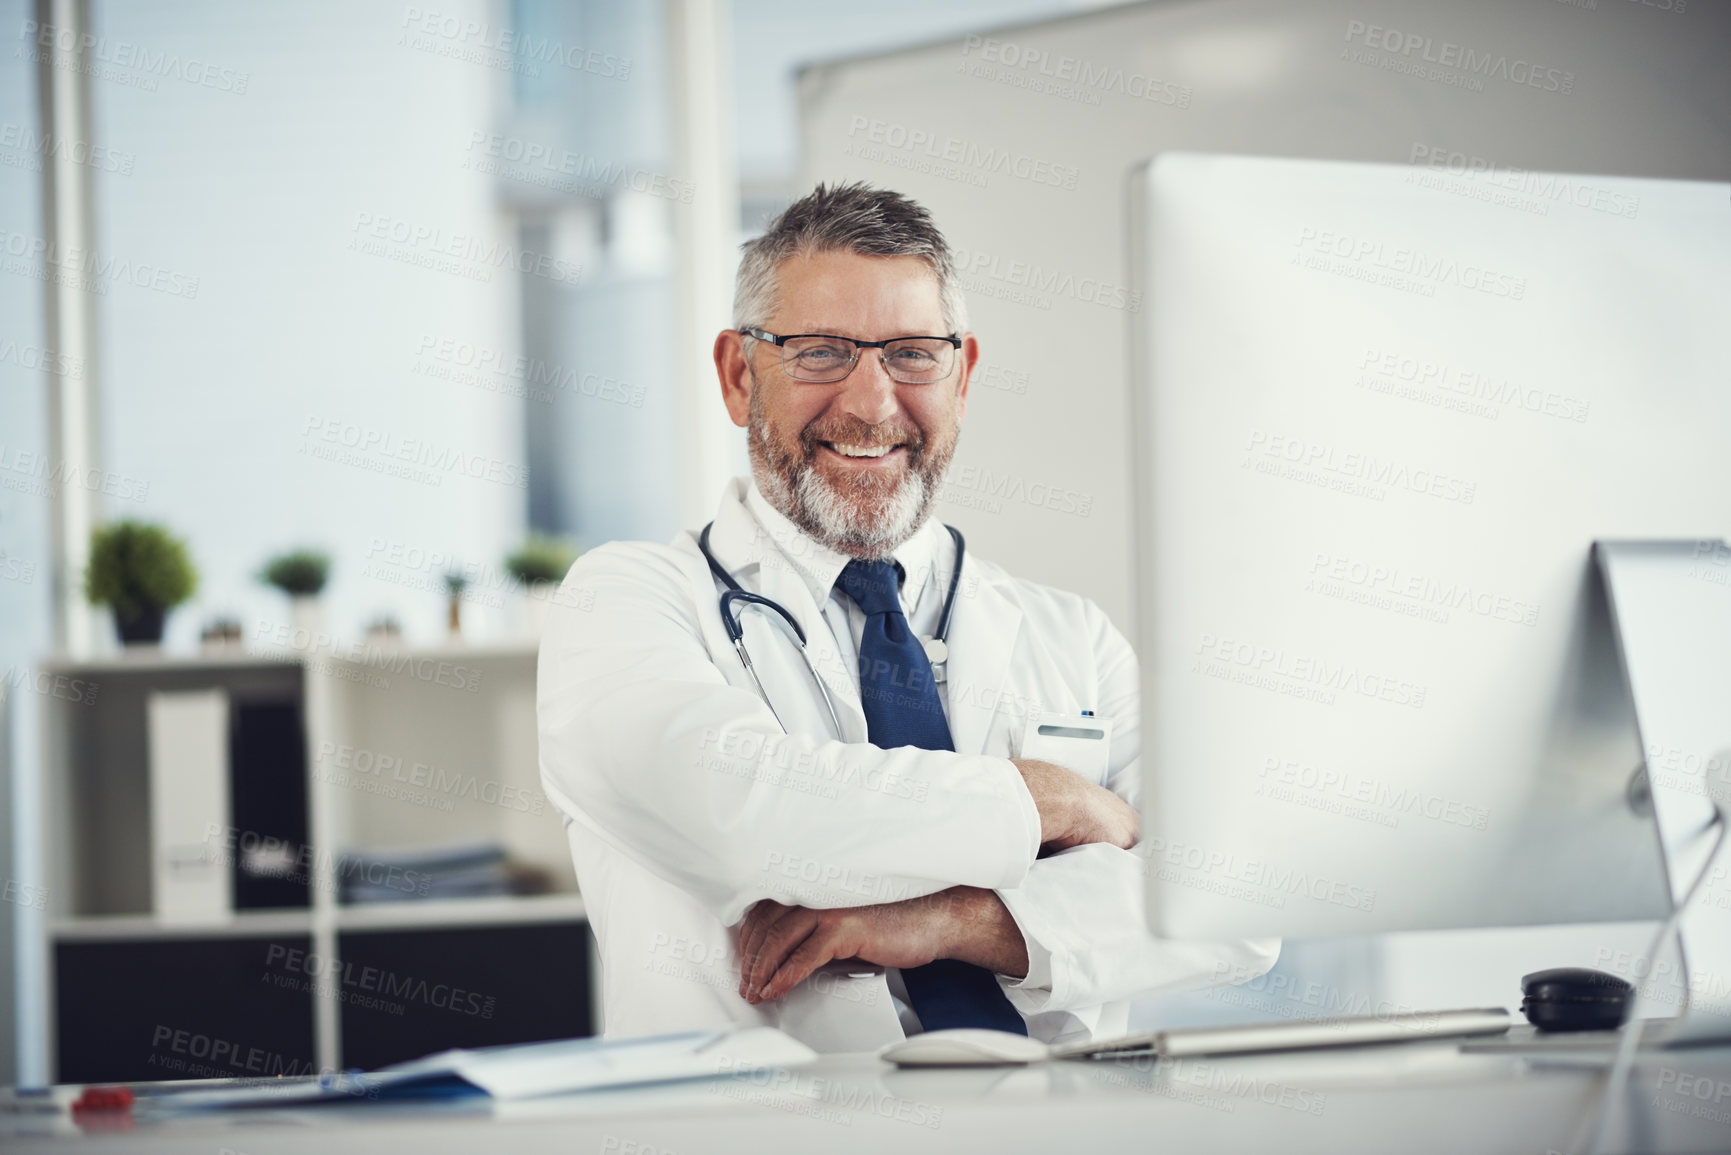 Buy stock photo Portrait of a mature doctor using a computer at a desk in his office